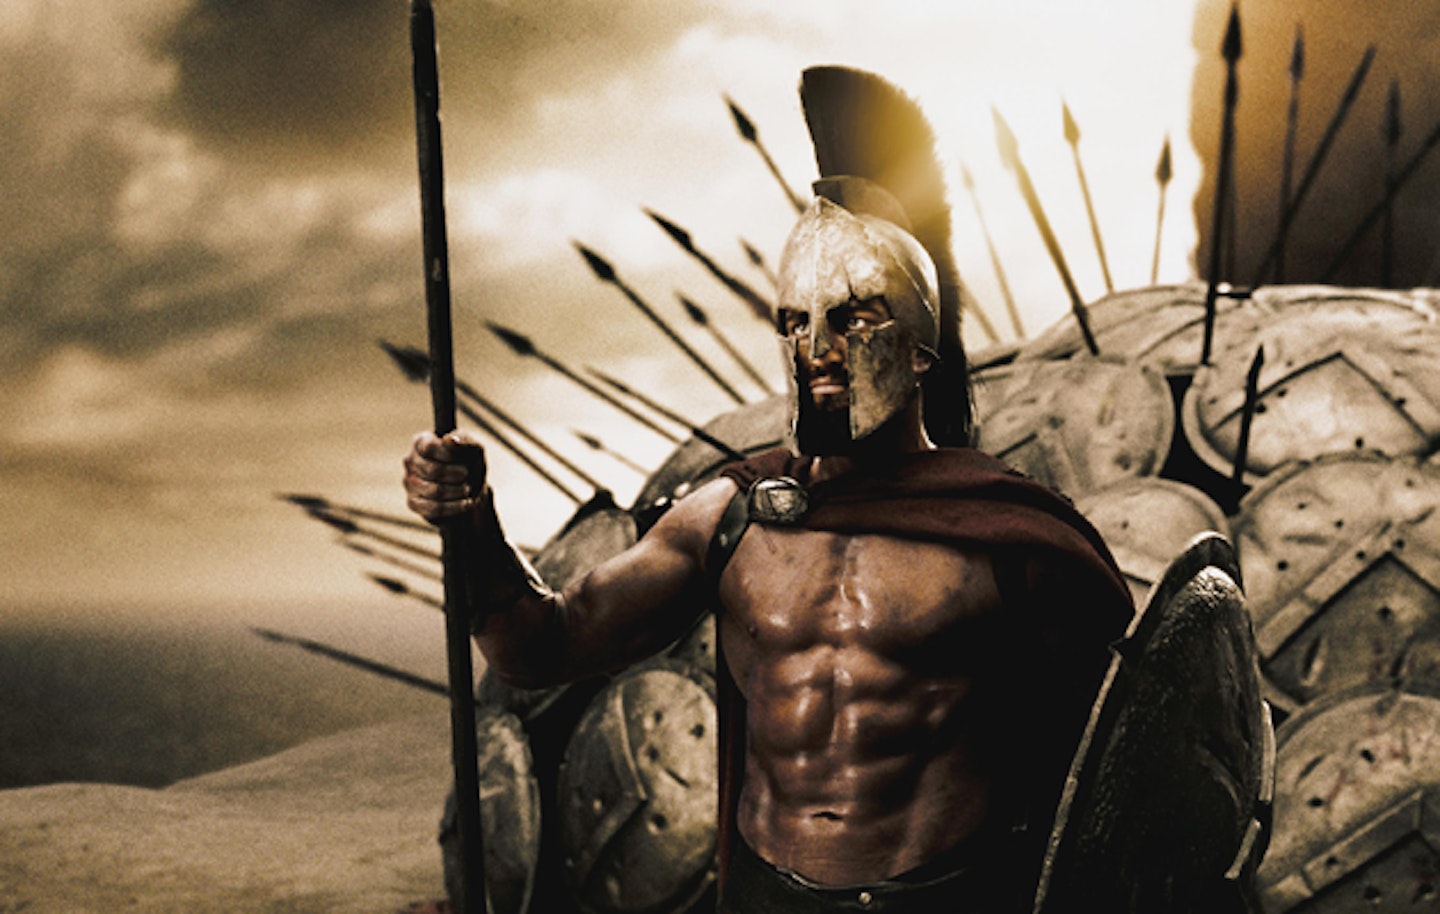 This Is SPARTA by SAMMY & LESEN and Gerard Butler on Beatsource